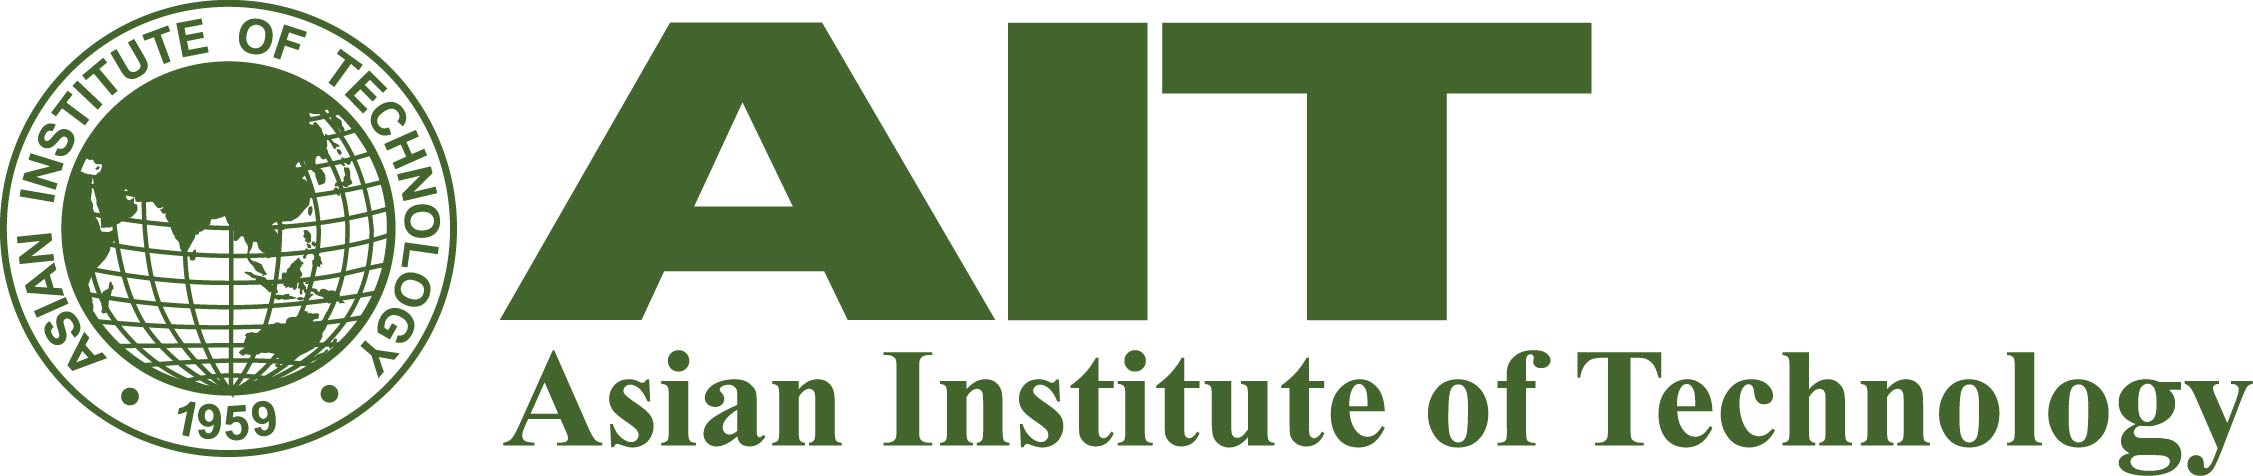 Asian Institute of Technology (AIT) Thailand